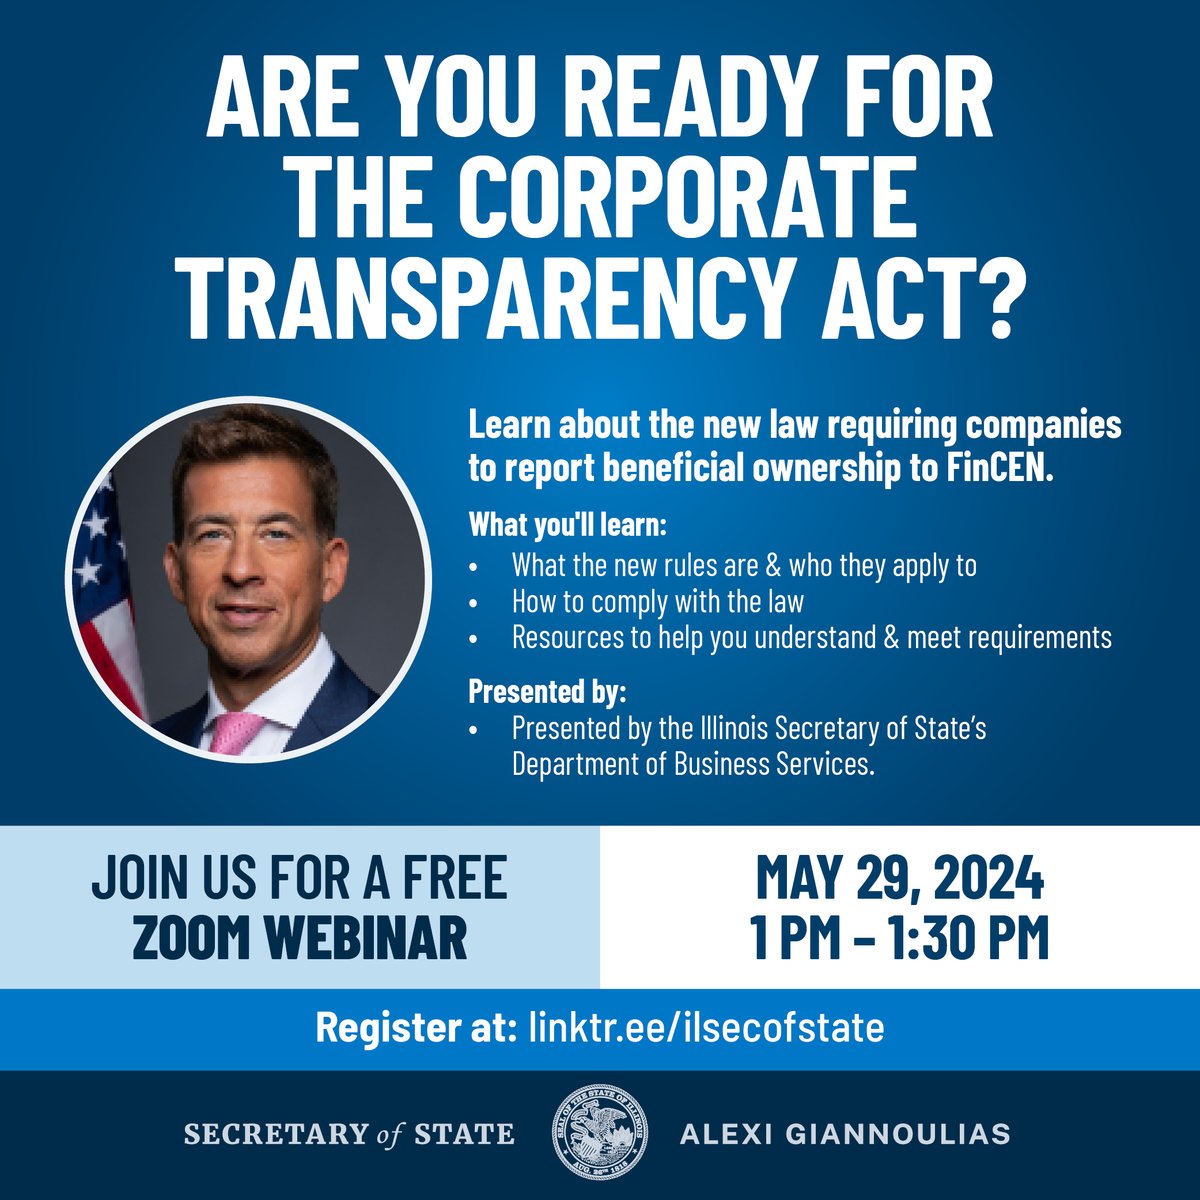 📢 ATTENTION SMALL/MID-SIZED BUSINESS OWNERS! Join us for a FREE webinar on the Corporate Transparency Act. Wednesday, May 29, 2024, from 1 to 1:30 PM. Learn about the new law and gain insights, compliance tips & resources from experts. Register at ⤵⤵: us02web.zoom.us/webinar/regist…